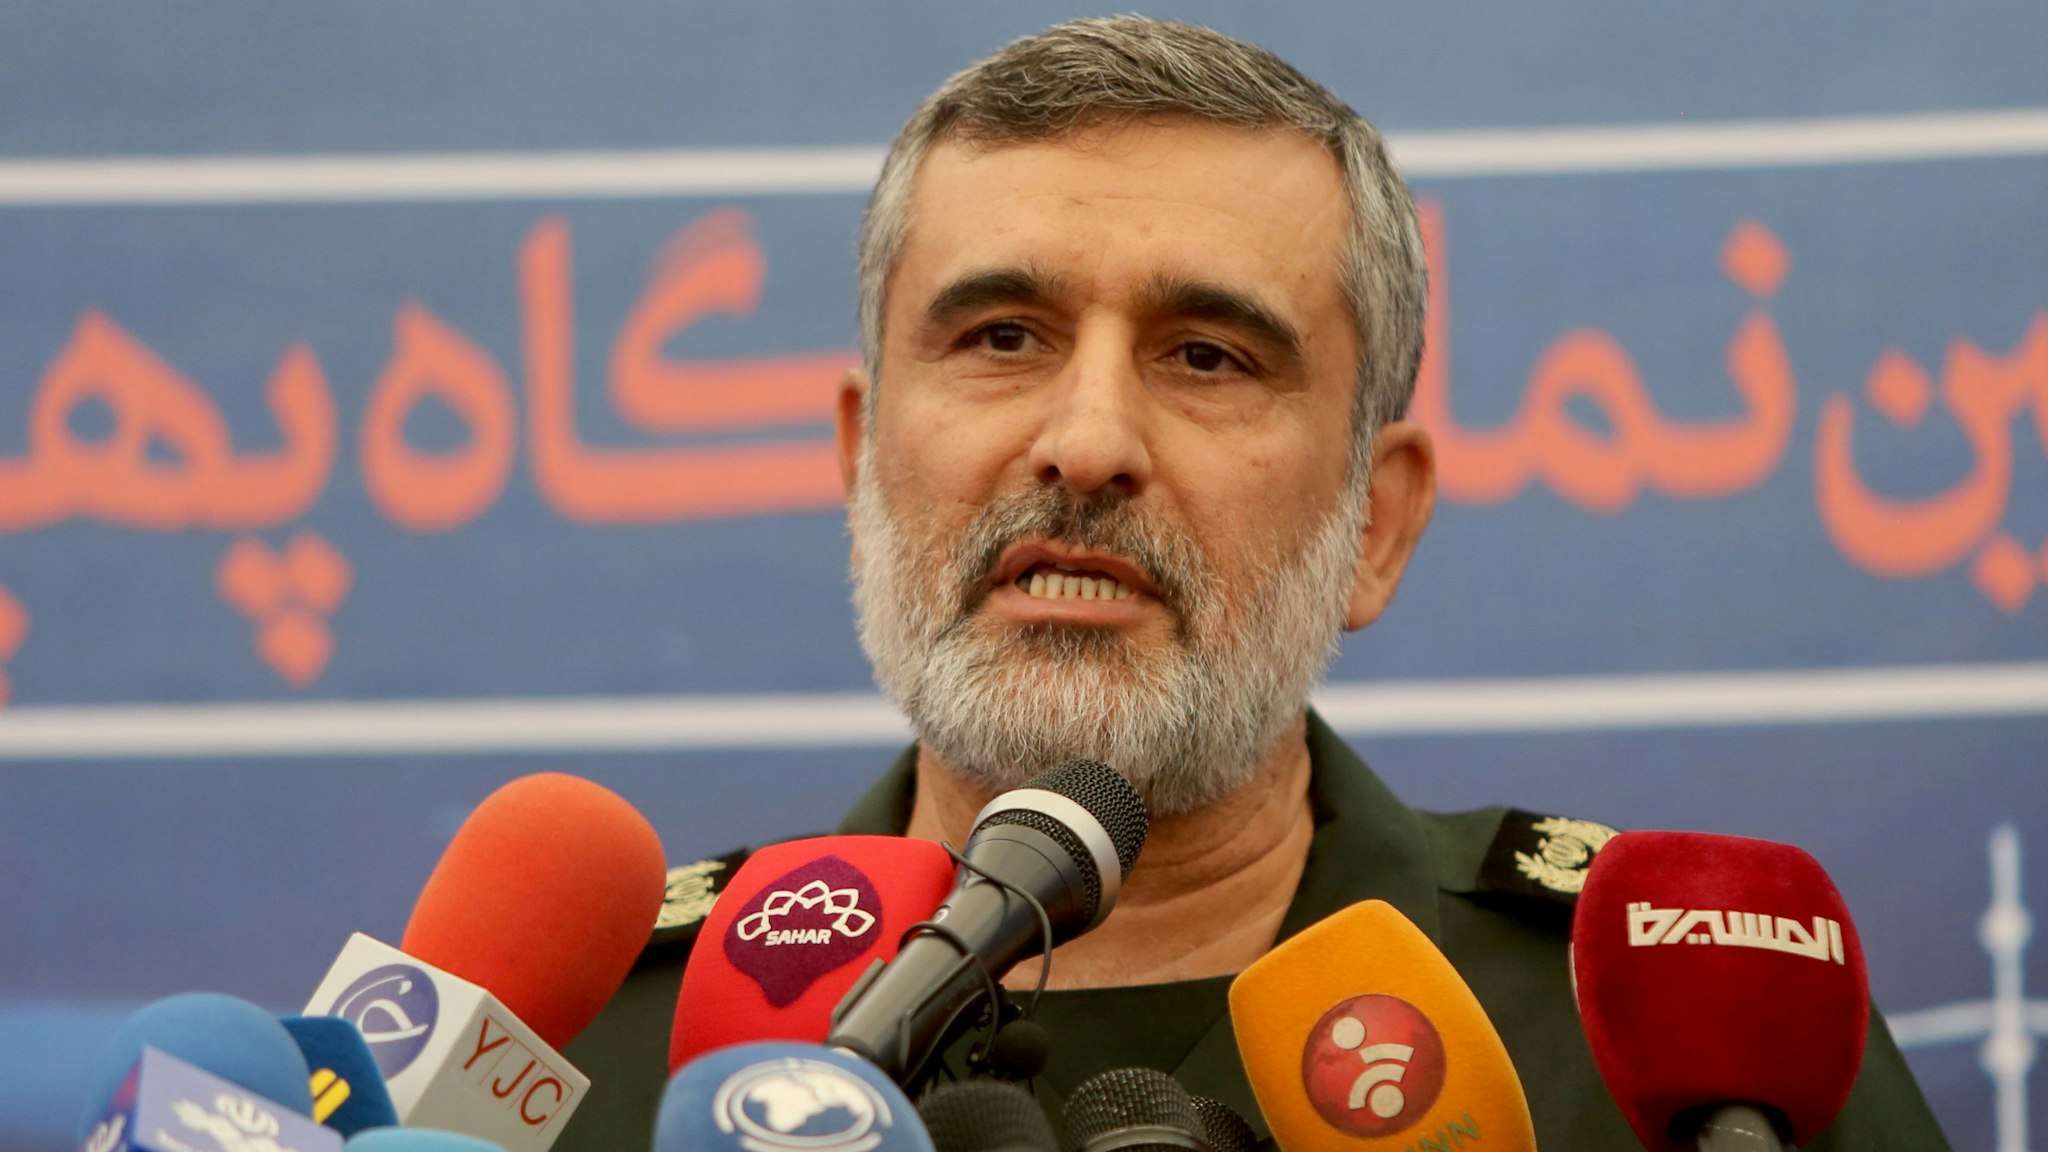 General Amir Ali Hajizadeh, the head of the Revolutionary Guard's aerospace division, speaks at Tehran's Islamic Revolution and Holy Defence museum, during the unveiling of an exhibition of what Iran says are US and other drones captured in its territory, in the capital Tehran on September 21, 2019. - Iran's Revolutionary Guards commander today warned any country that attacks the Islamic republic will see its territory become the "main battlefield" as he opened an exhibition of captured drones